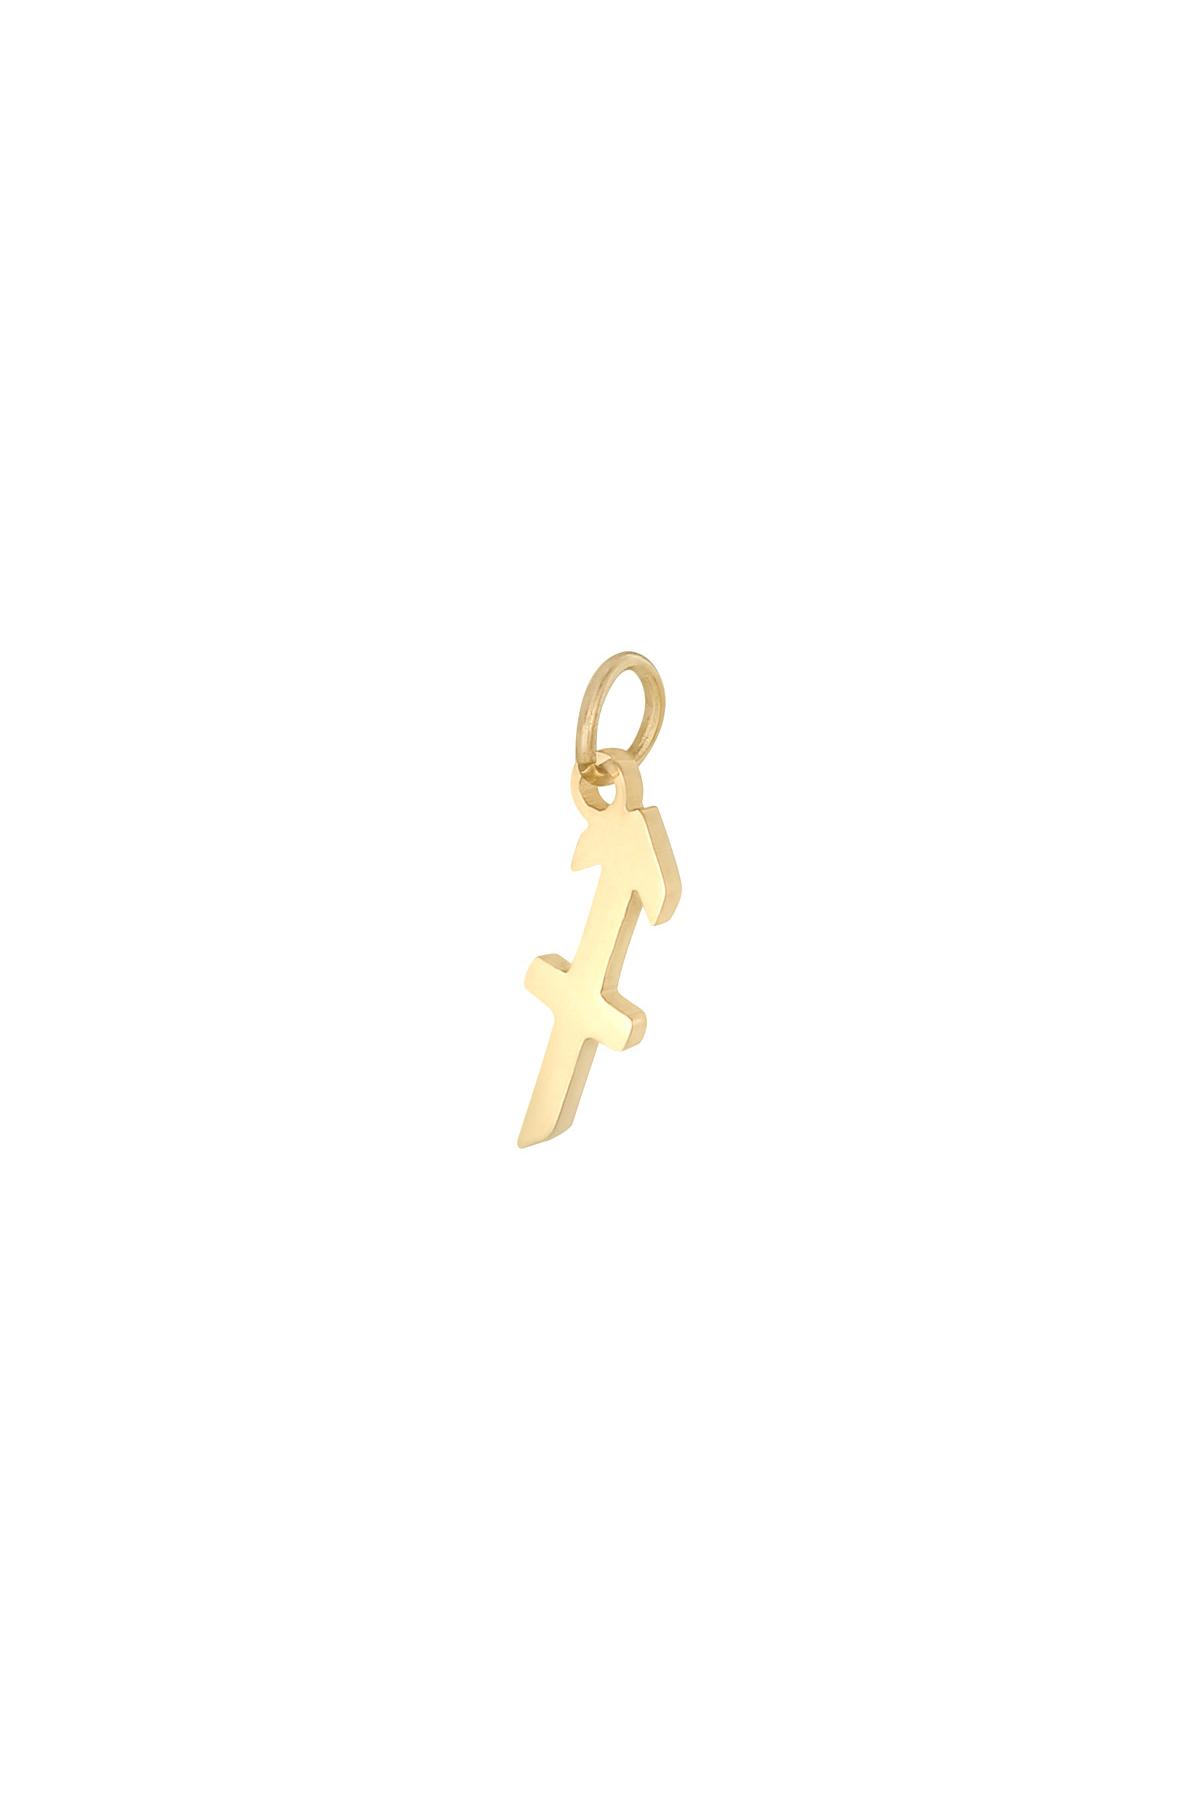 Gold / Charm Zodiac Sagittarius Gold Stainless Steel Picture16